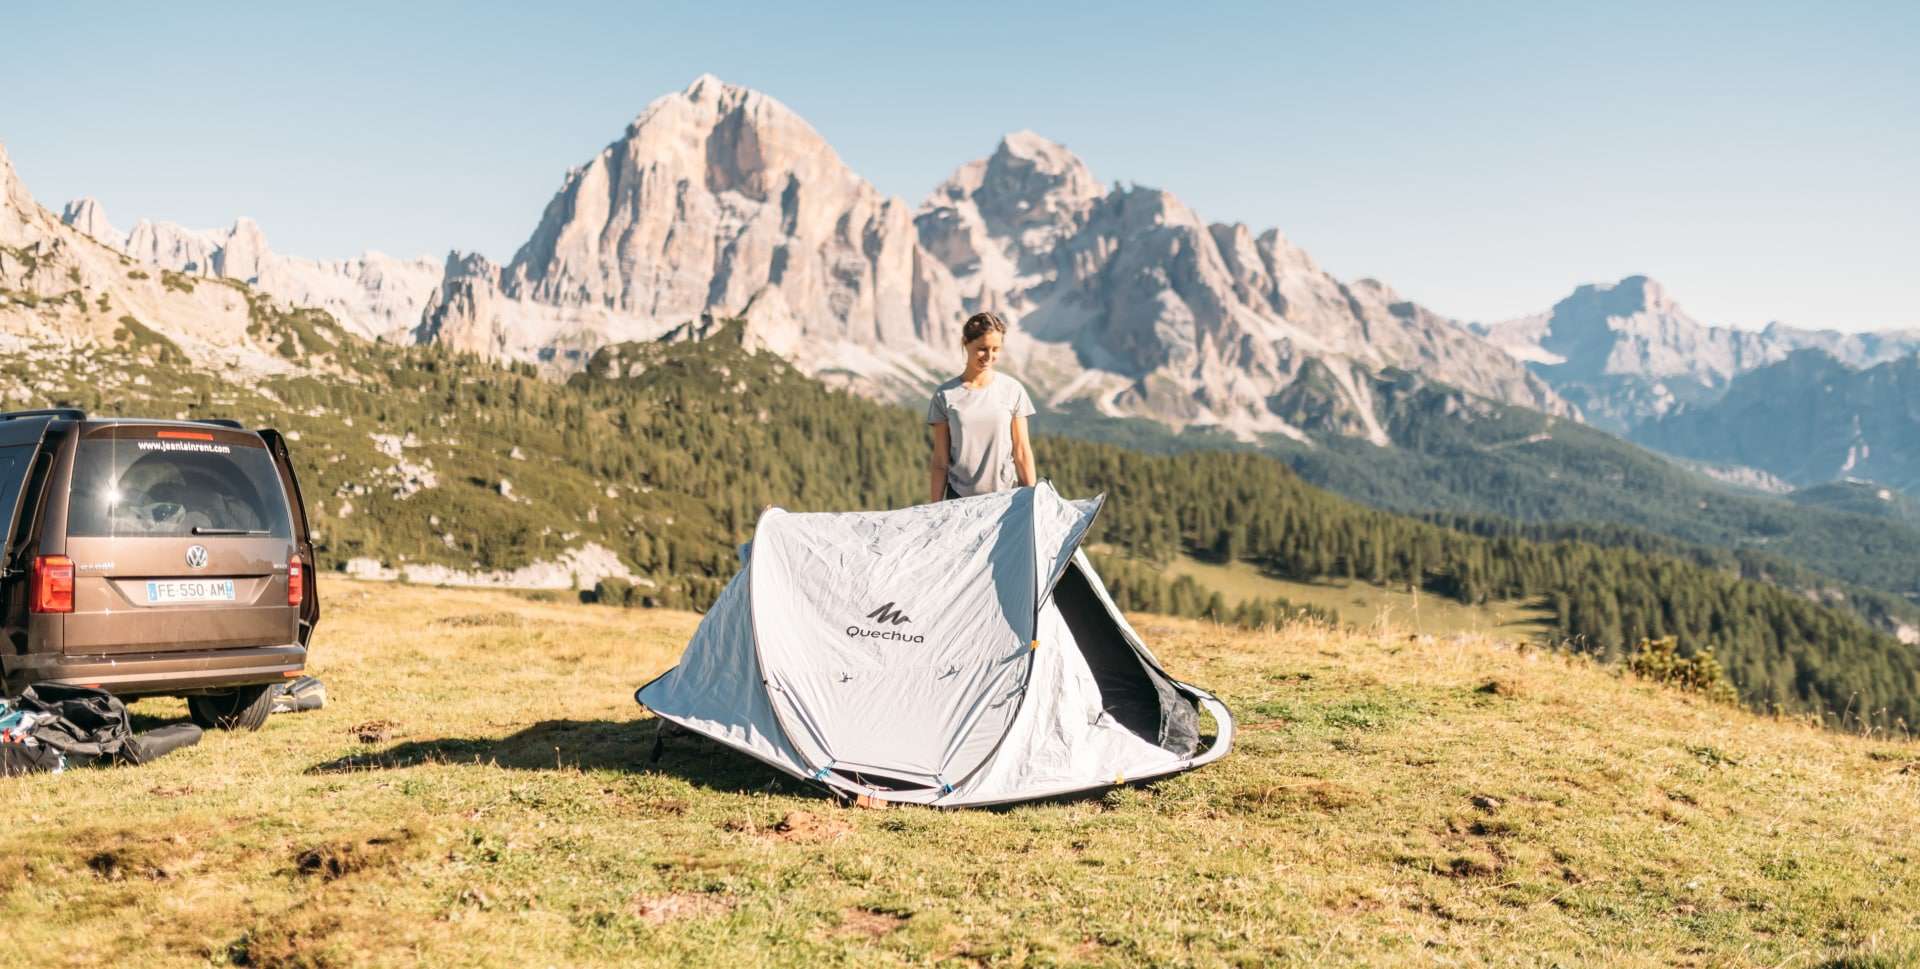 The Quechua instant tent set up for camping